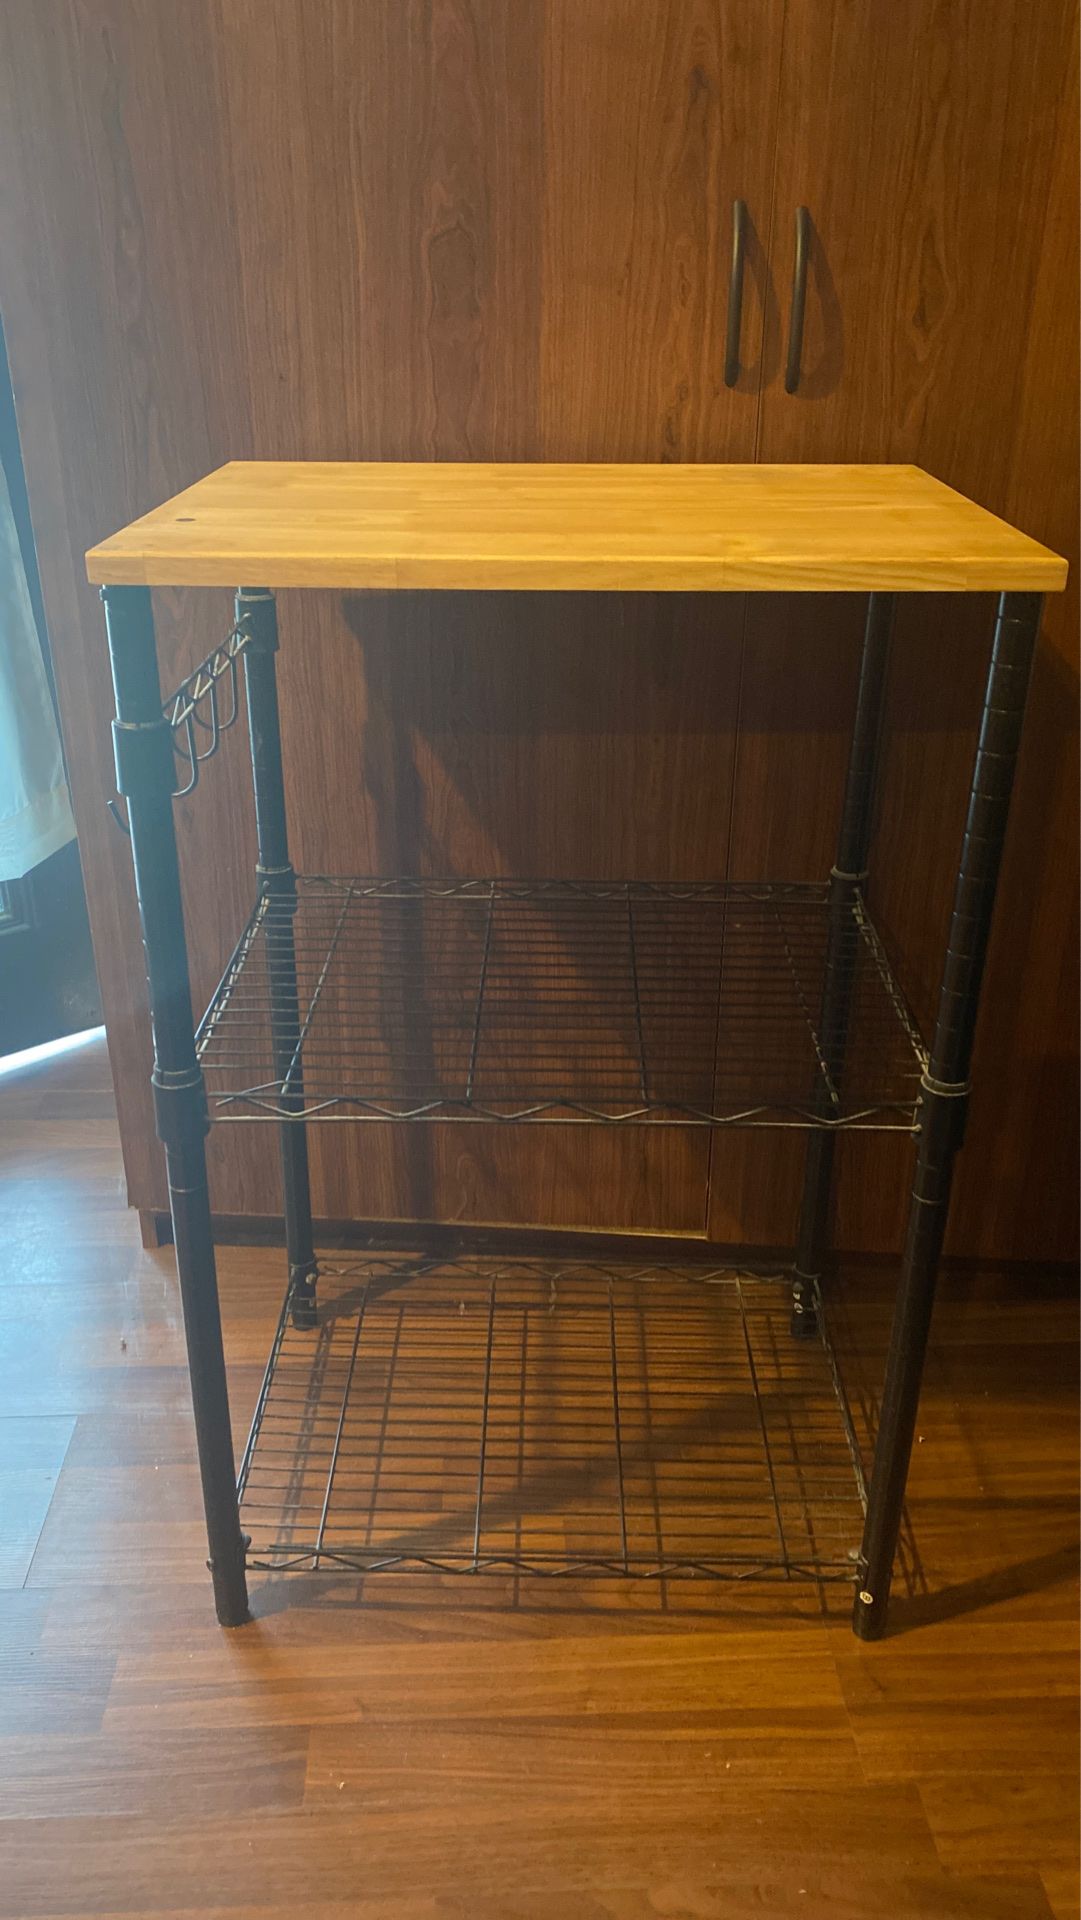 Used. Kitchen end table